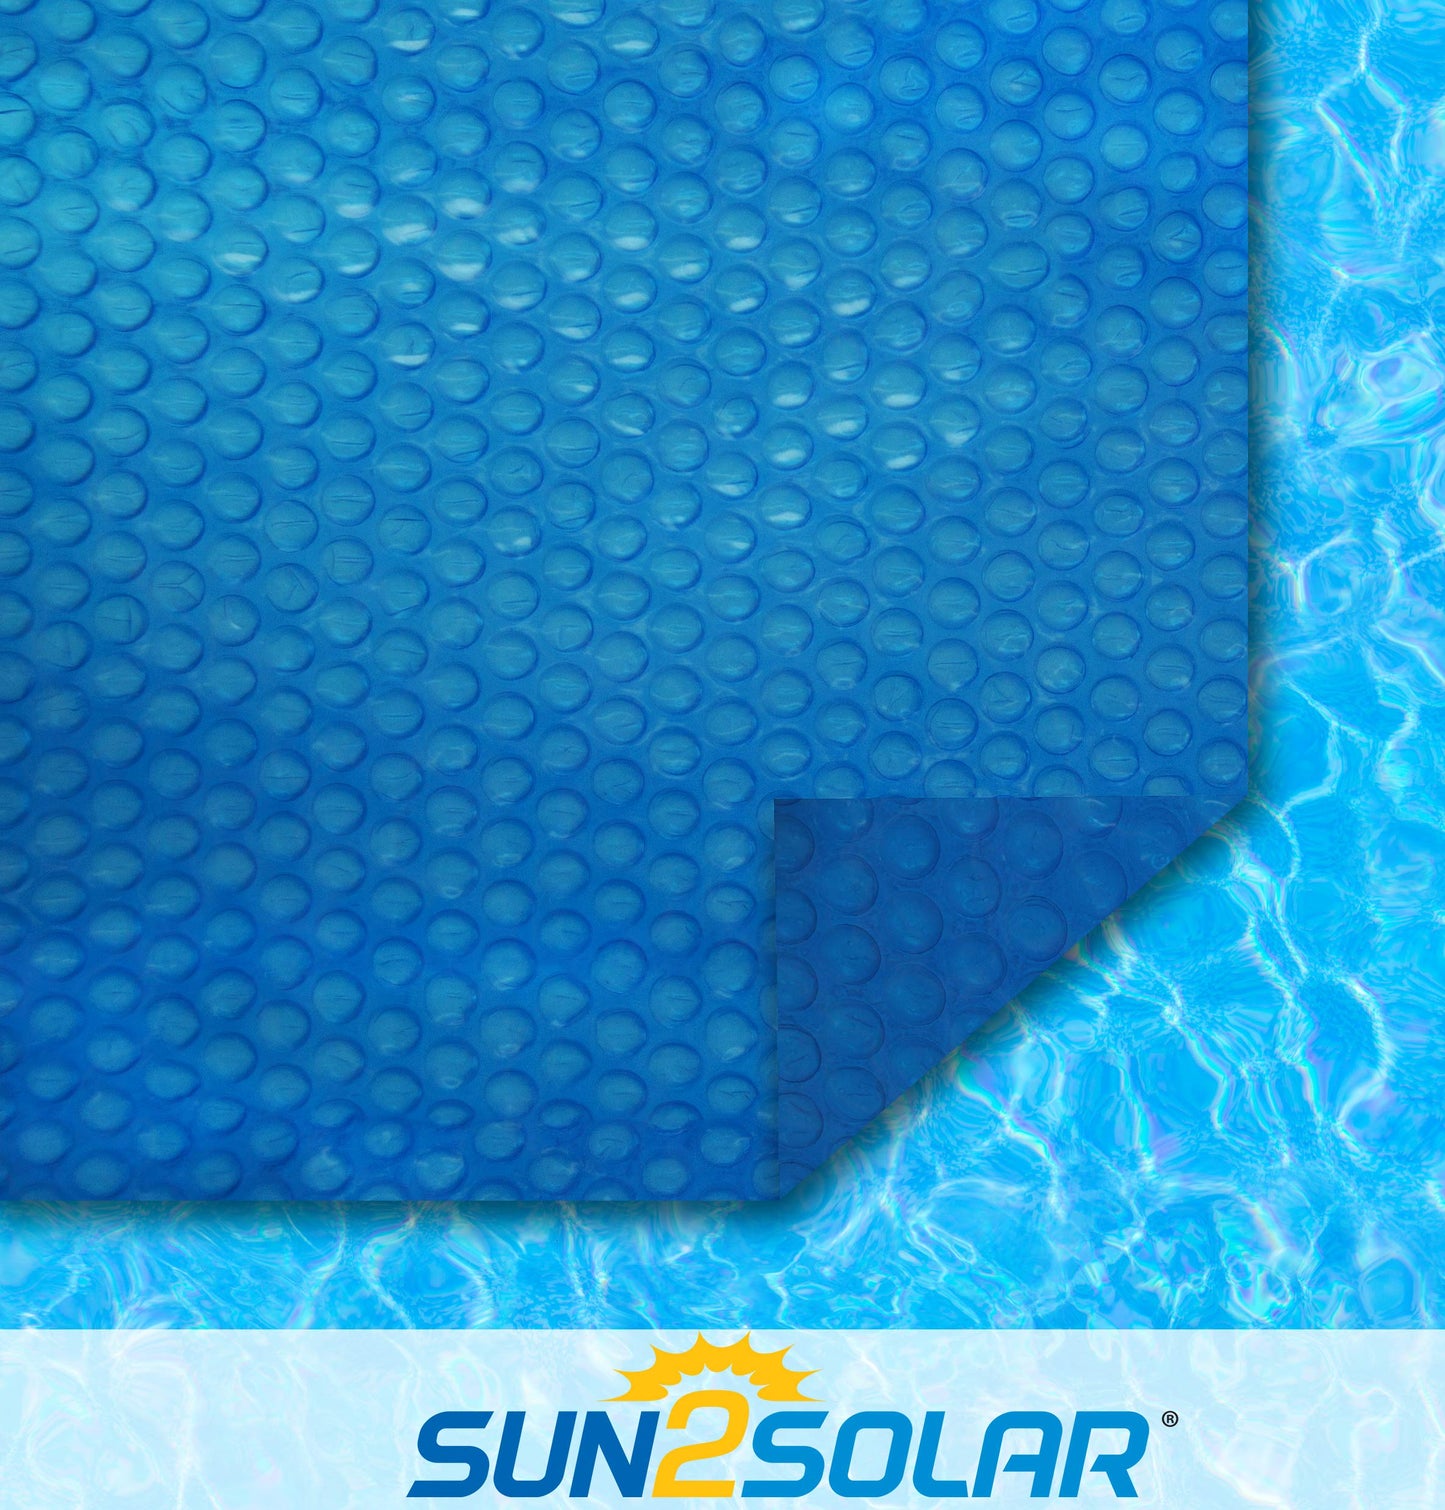 Sun2Solar Blue 10-Foot-by-15-Foot Oval Solar Cover | 1200 Series